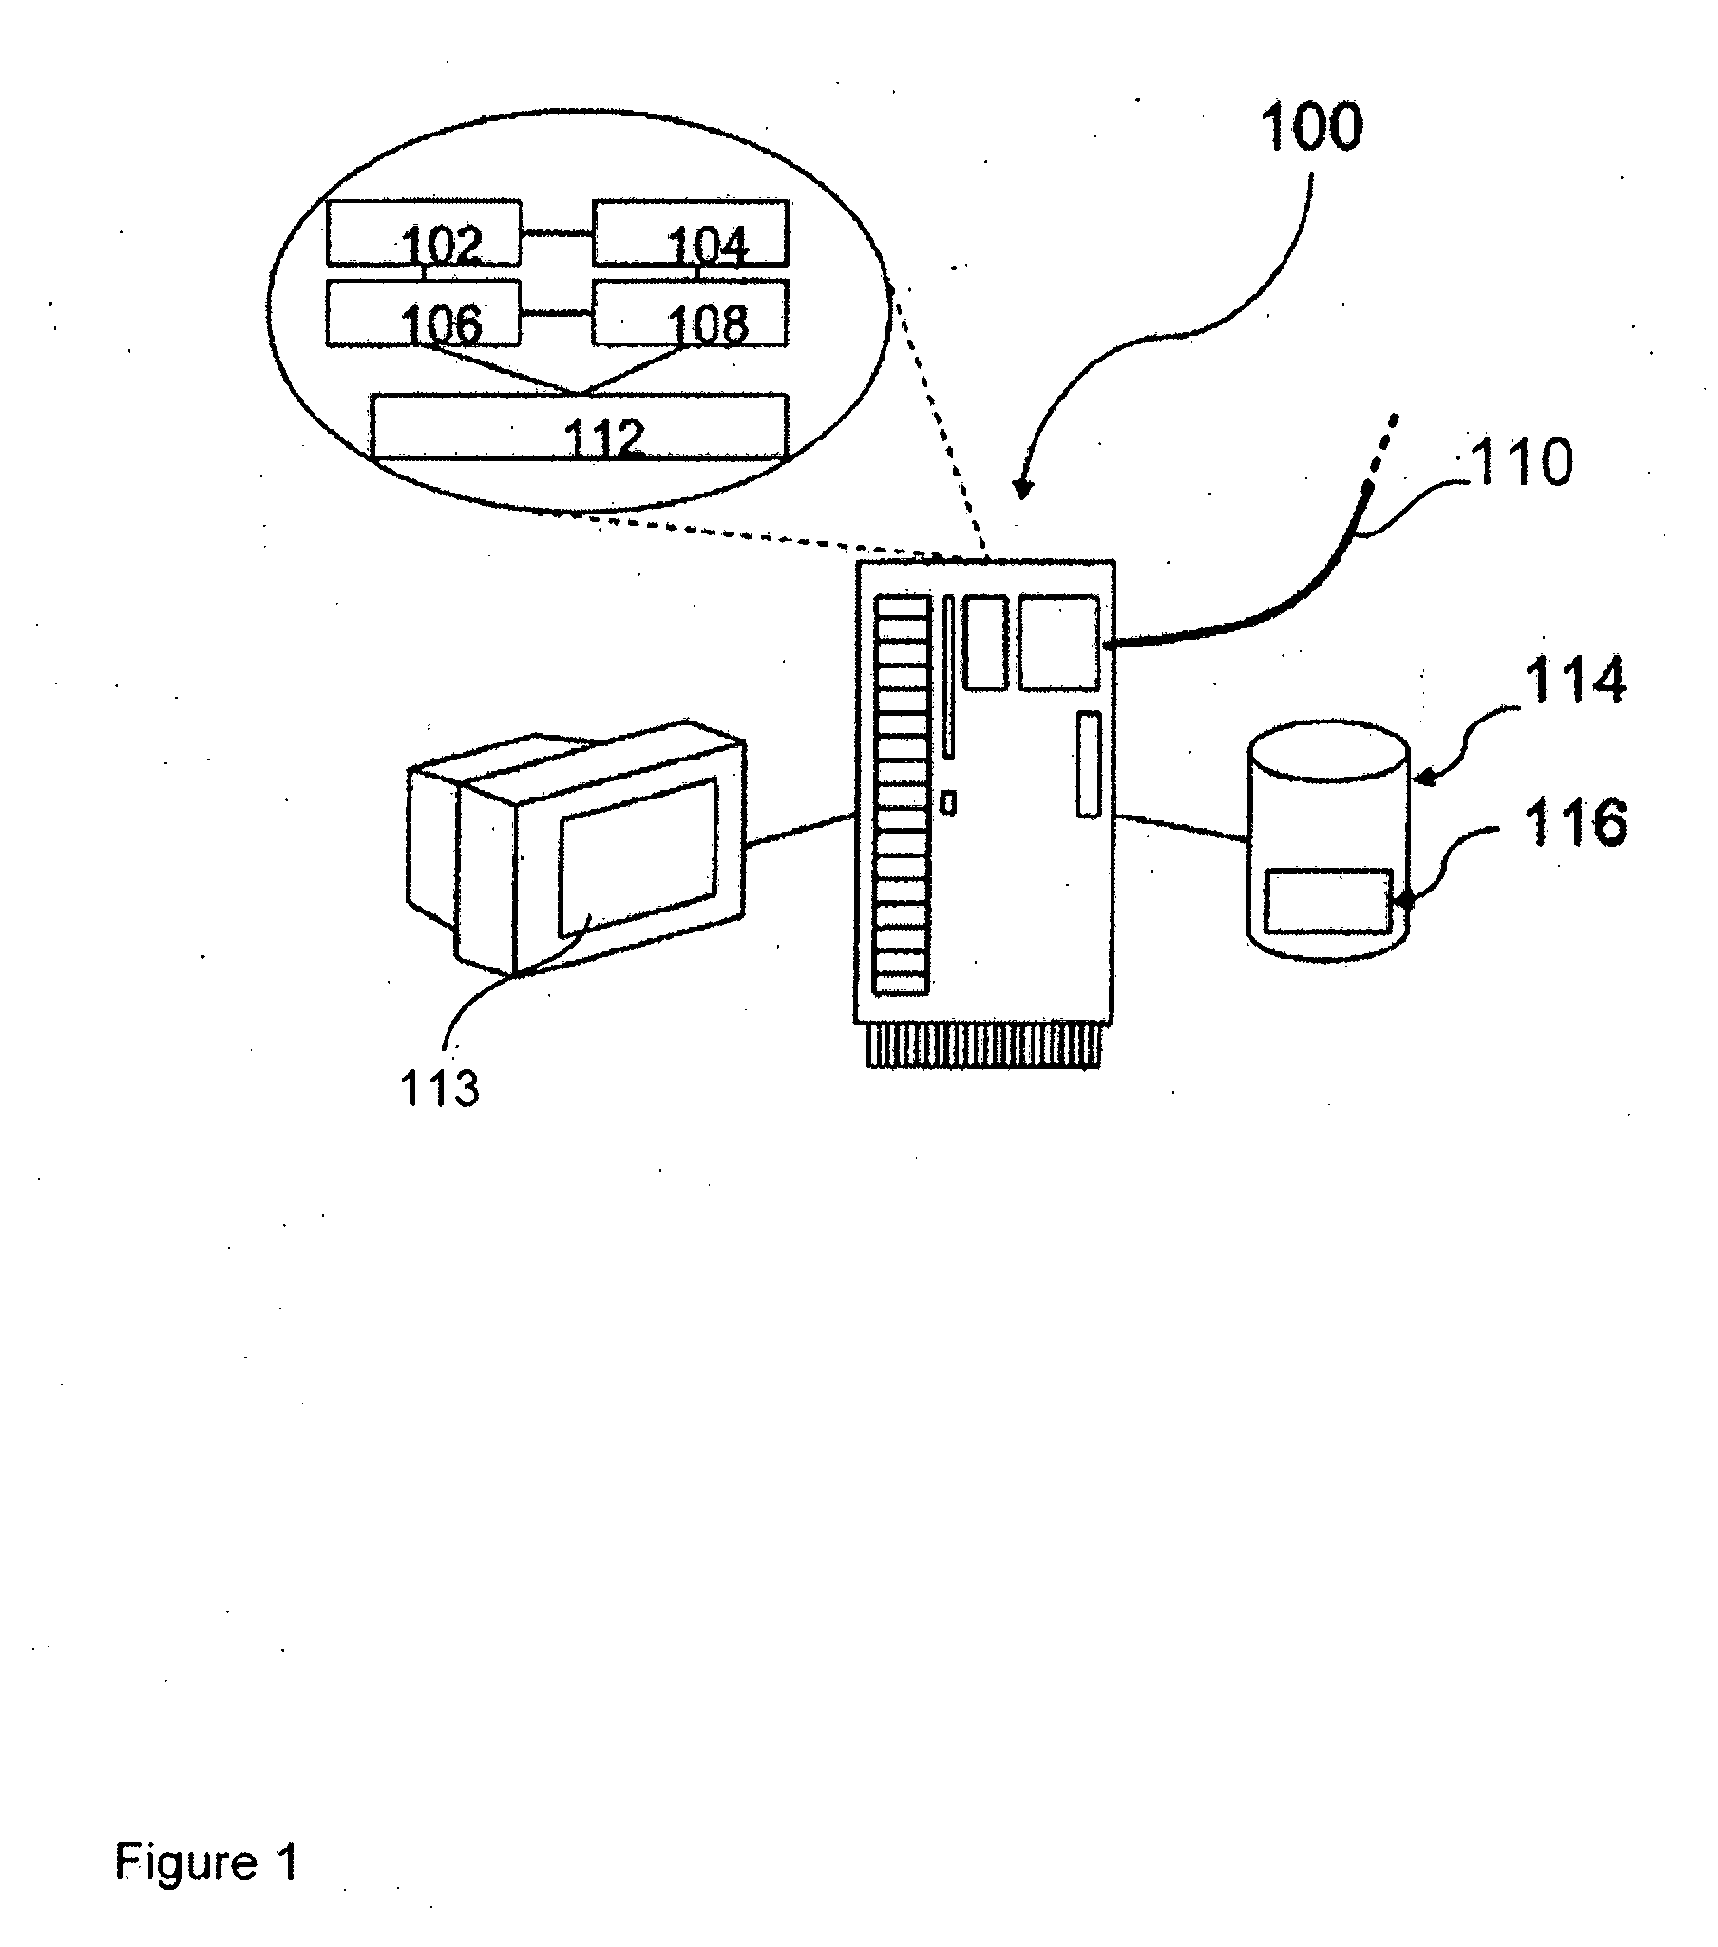 Method for large scale, non-reverting and distributed spatial estimation